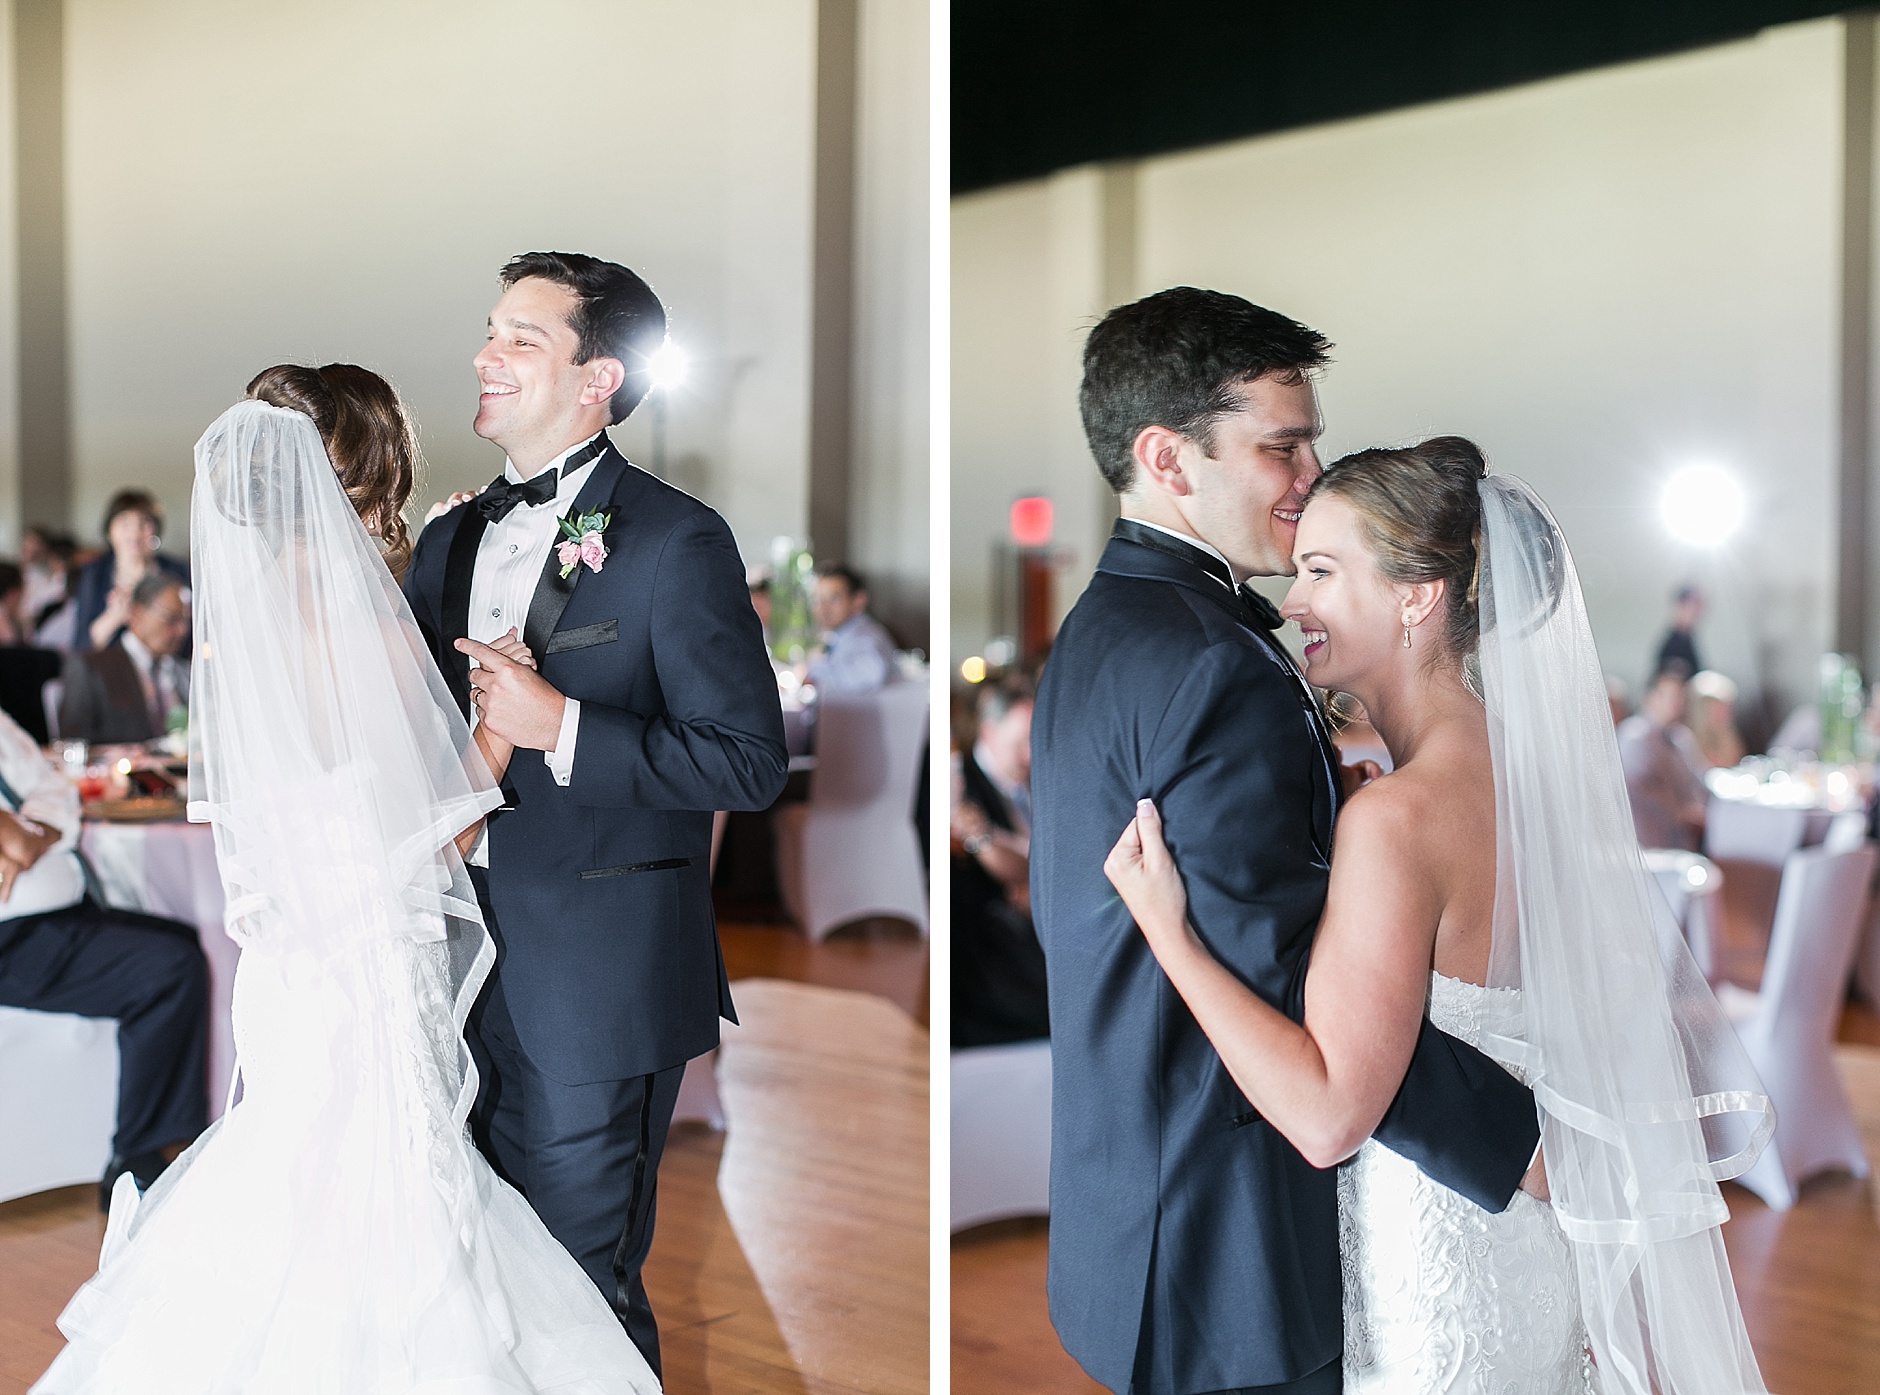 A Sage and Blush Wedding in Downtown Paducah by Rachael Houser Photography